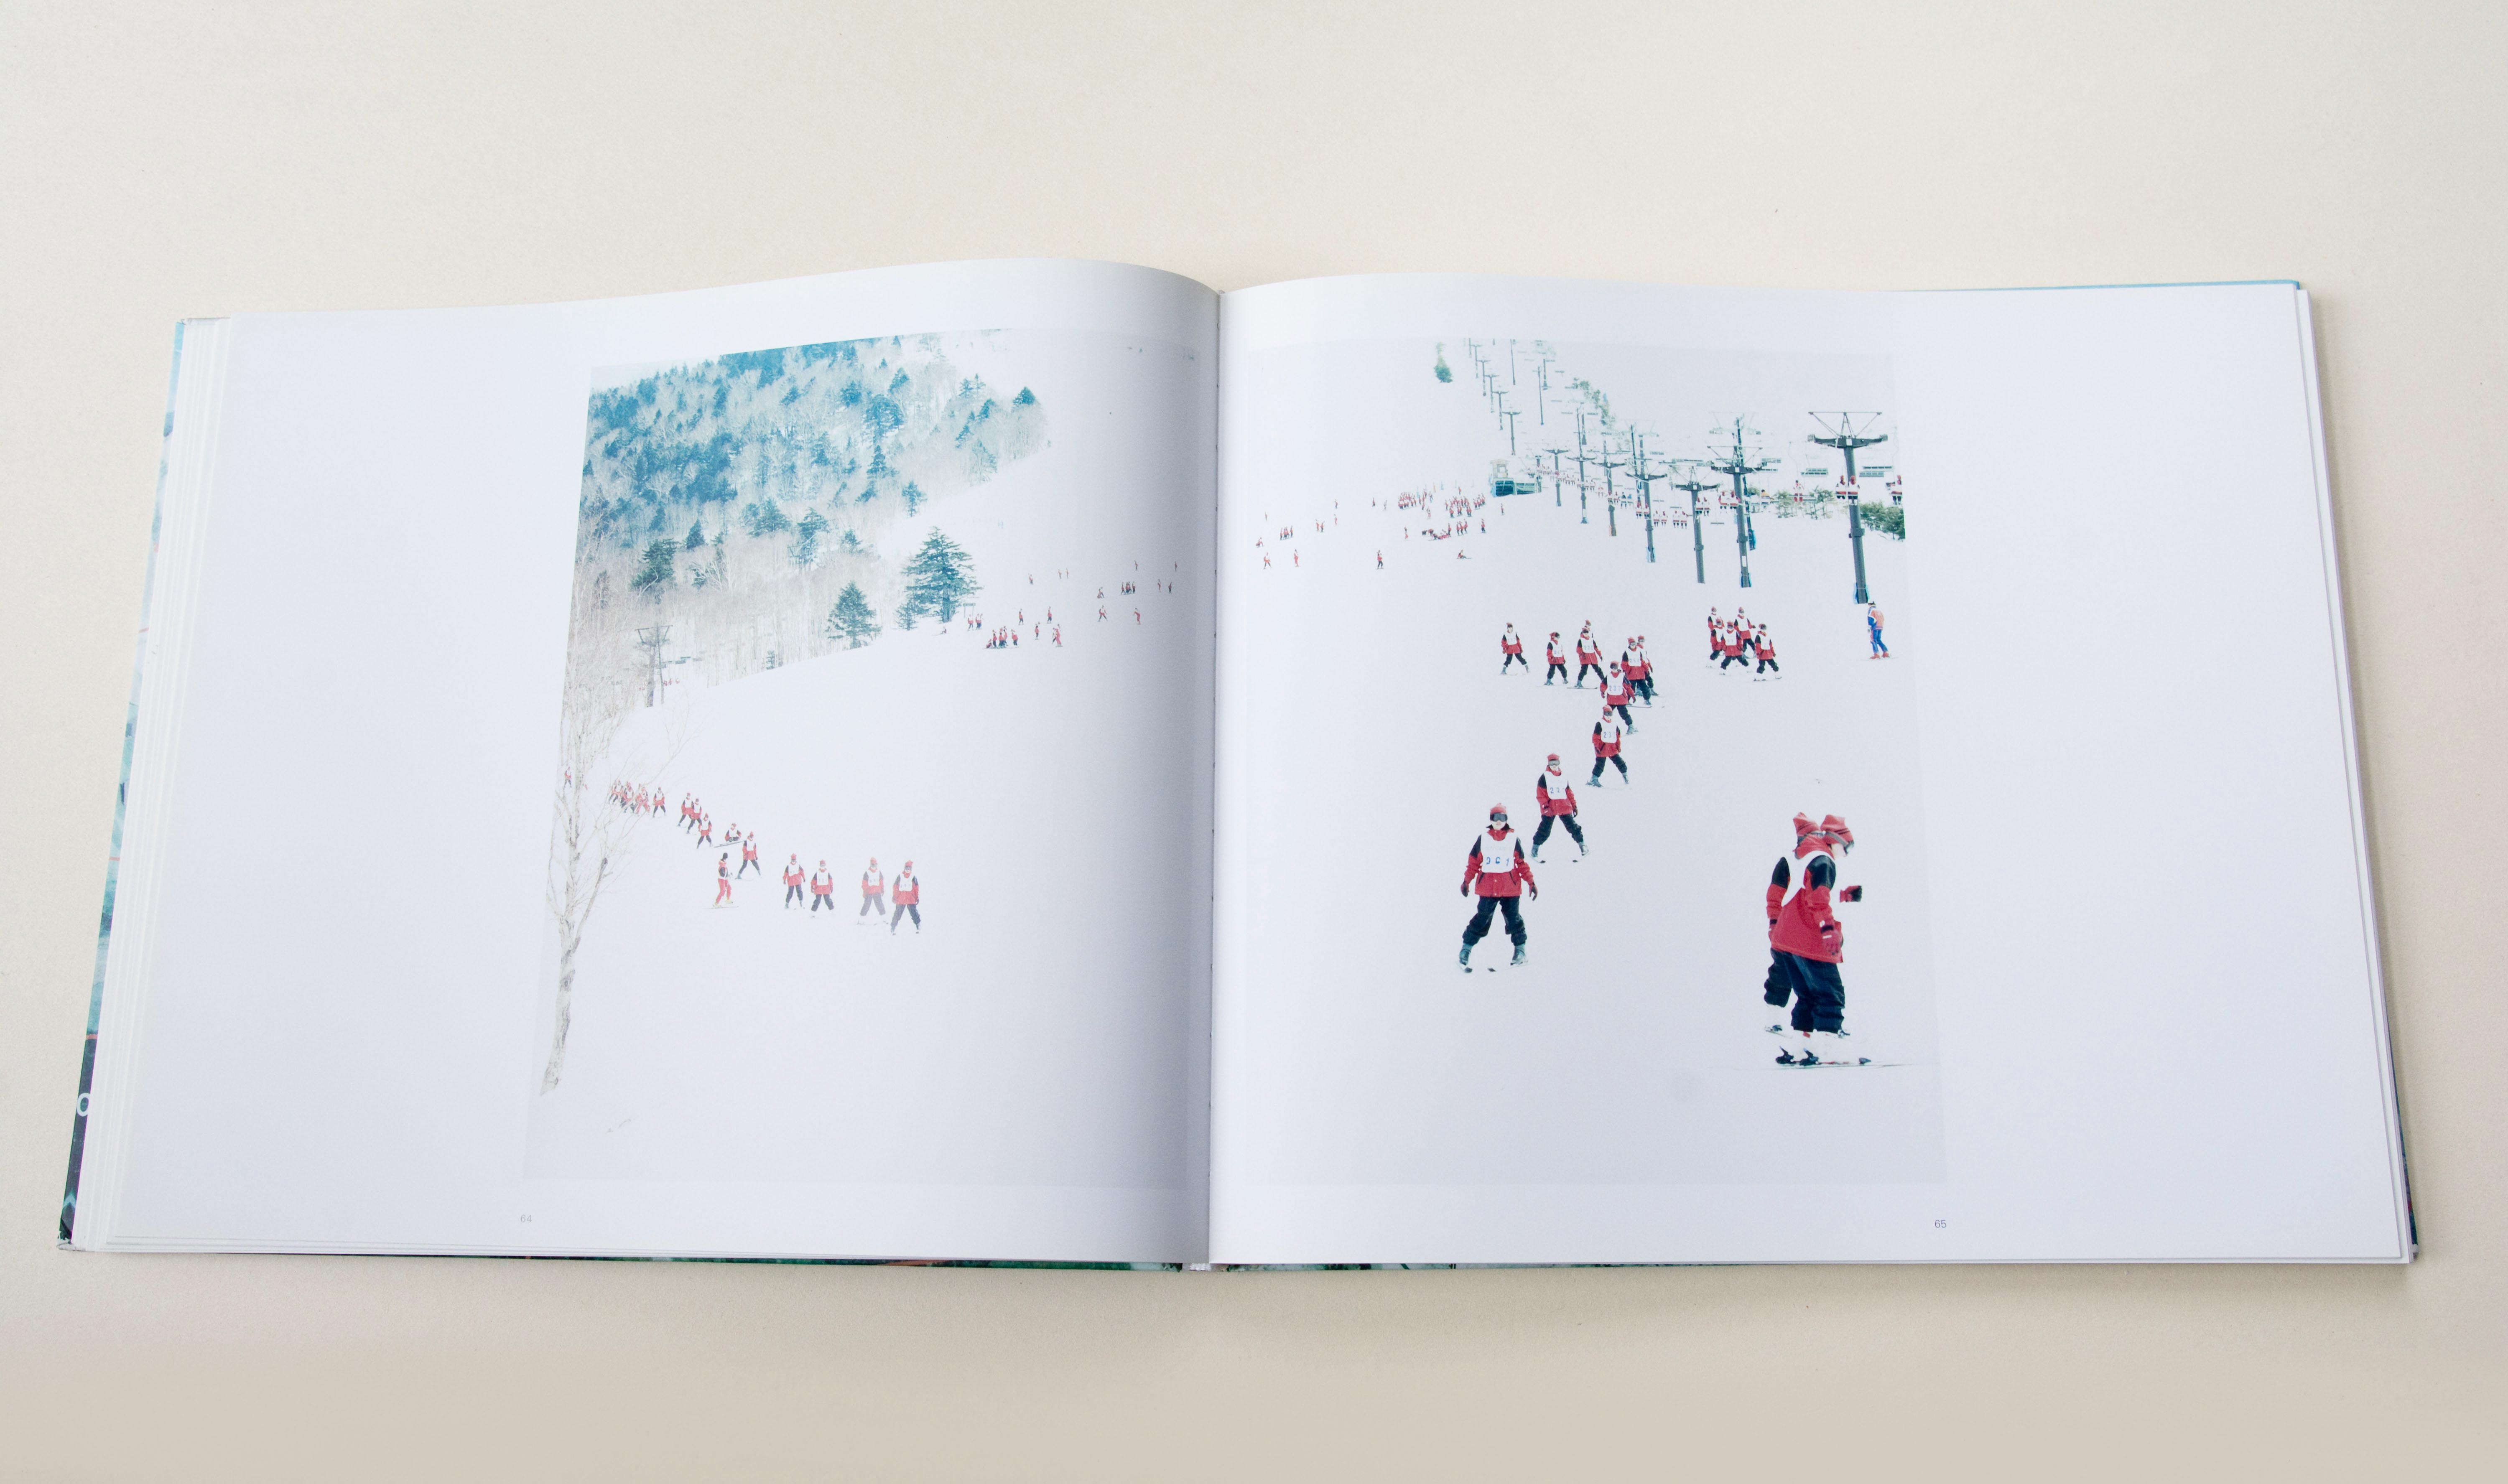 Double page. Large similar photo on each page. Skiing slope in the mountains. Group of kids skiing one after each other.